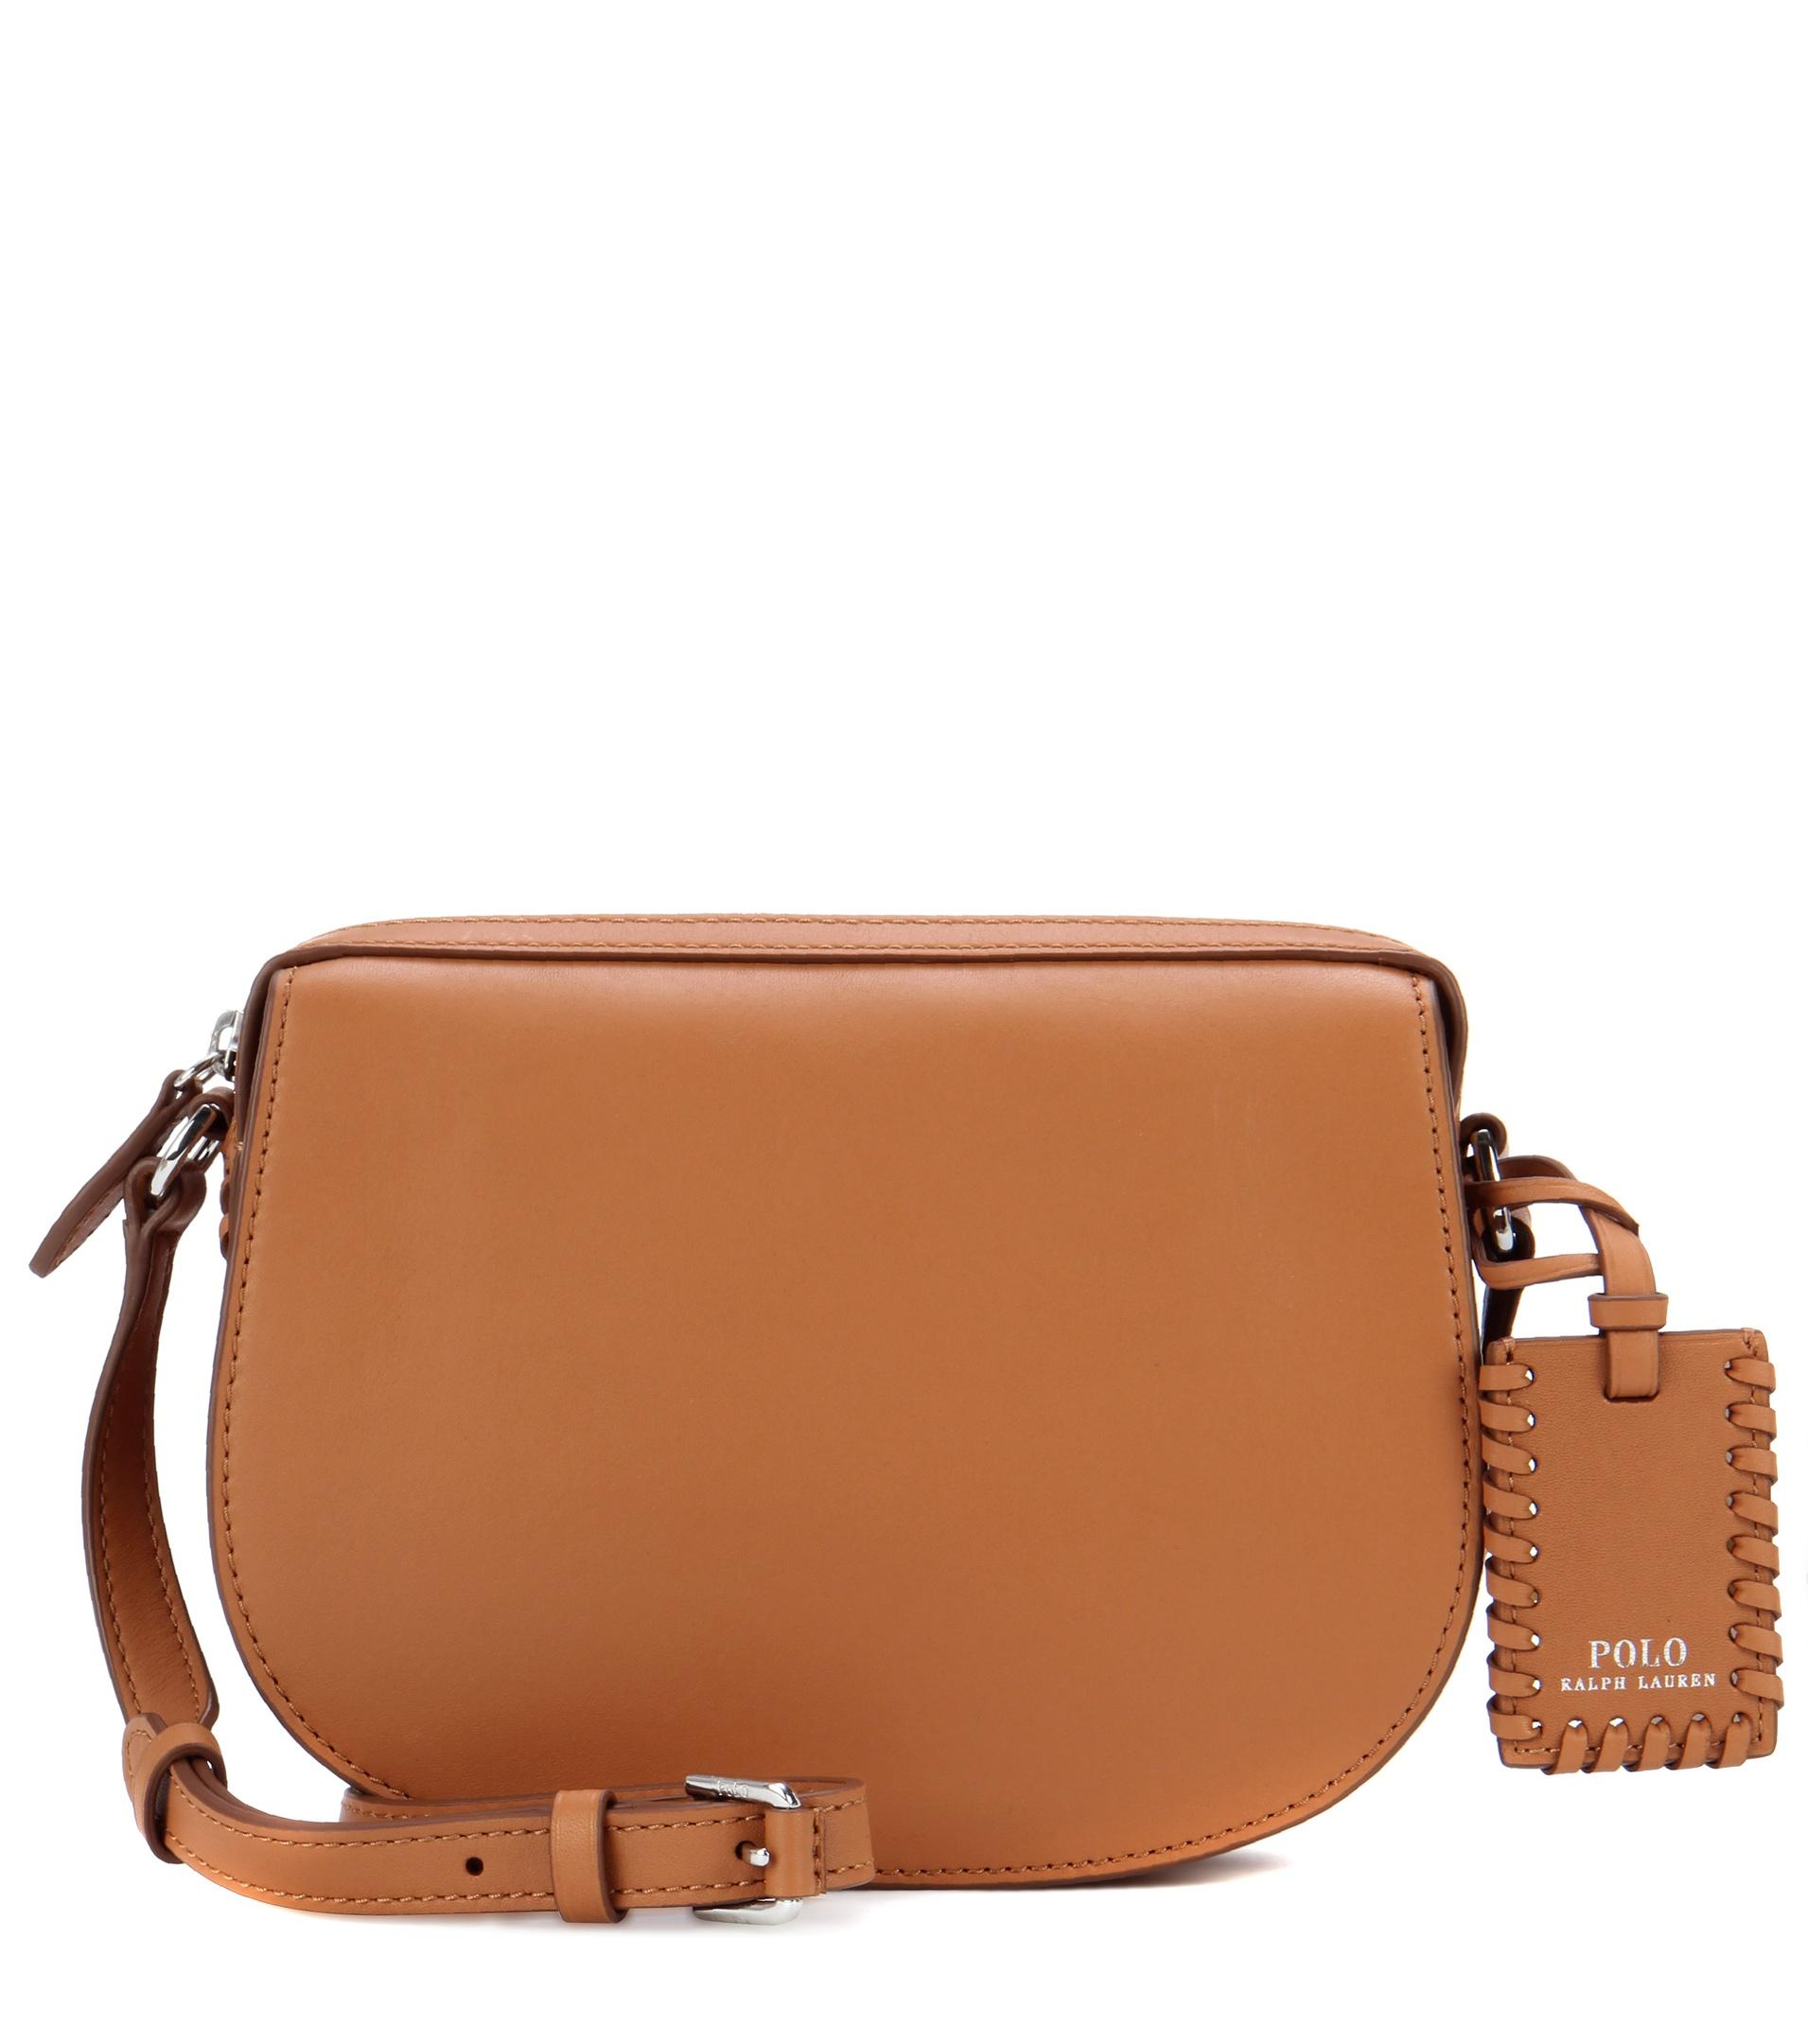 Polo Ralph Lauren Saddle Leather Crossbody Bag in Brown - Lyst